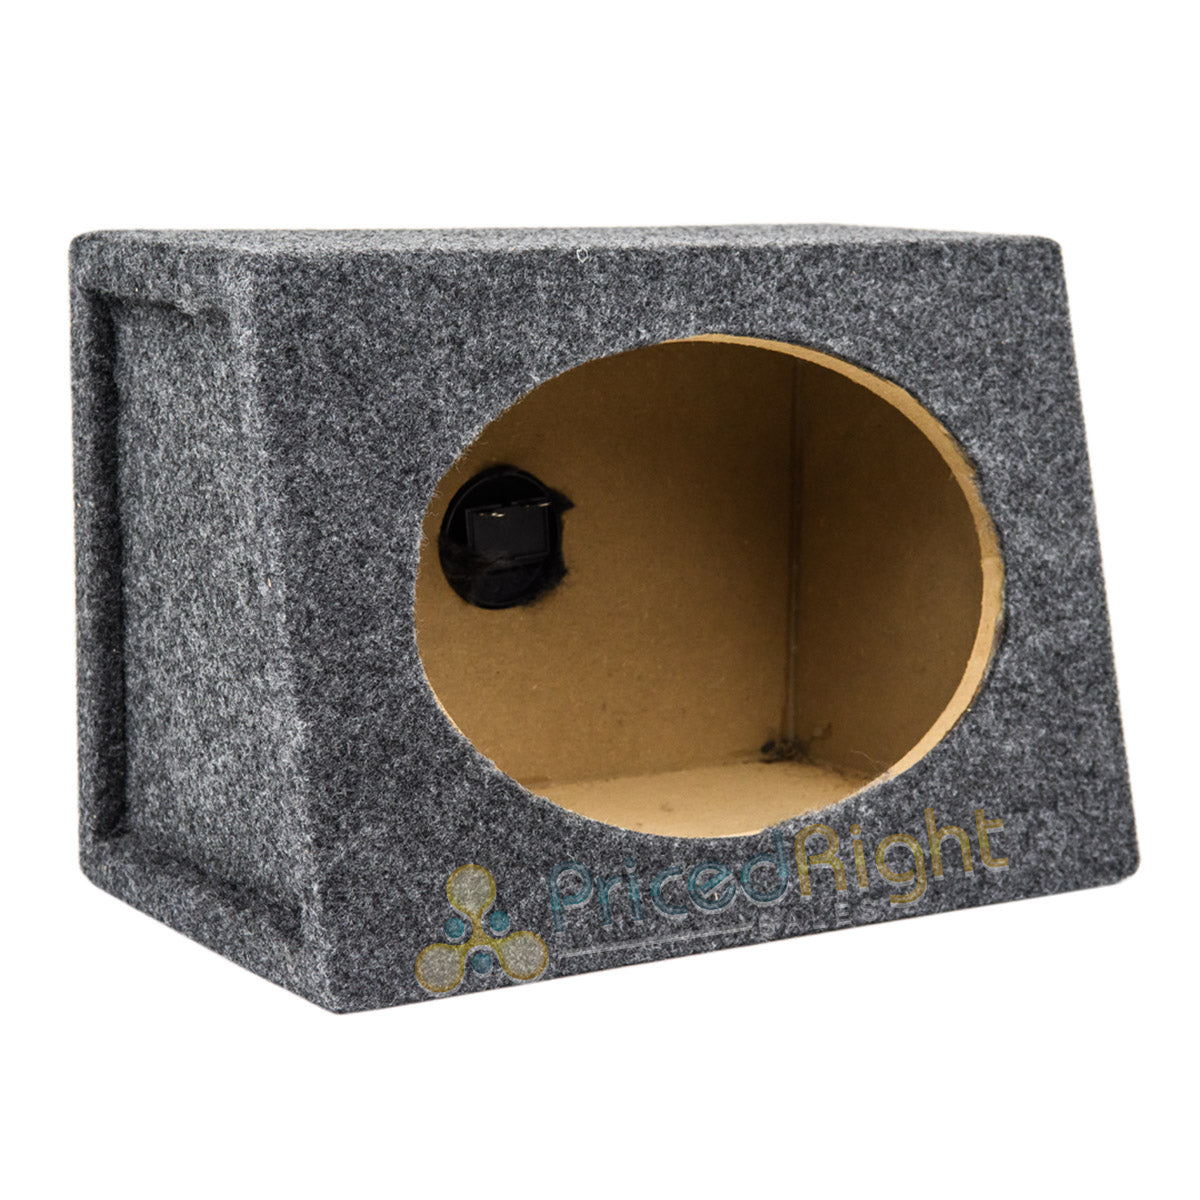 Cerwin Vega H7692 6x9" 2-Way Coaxial Speakers and Angled Enclosure Speaker Boxes